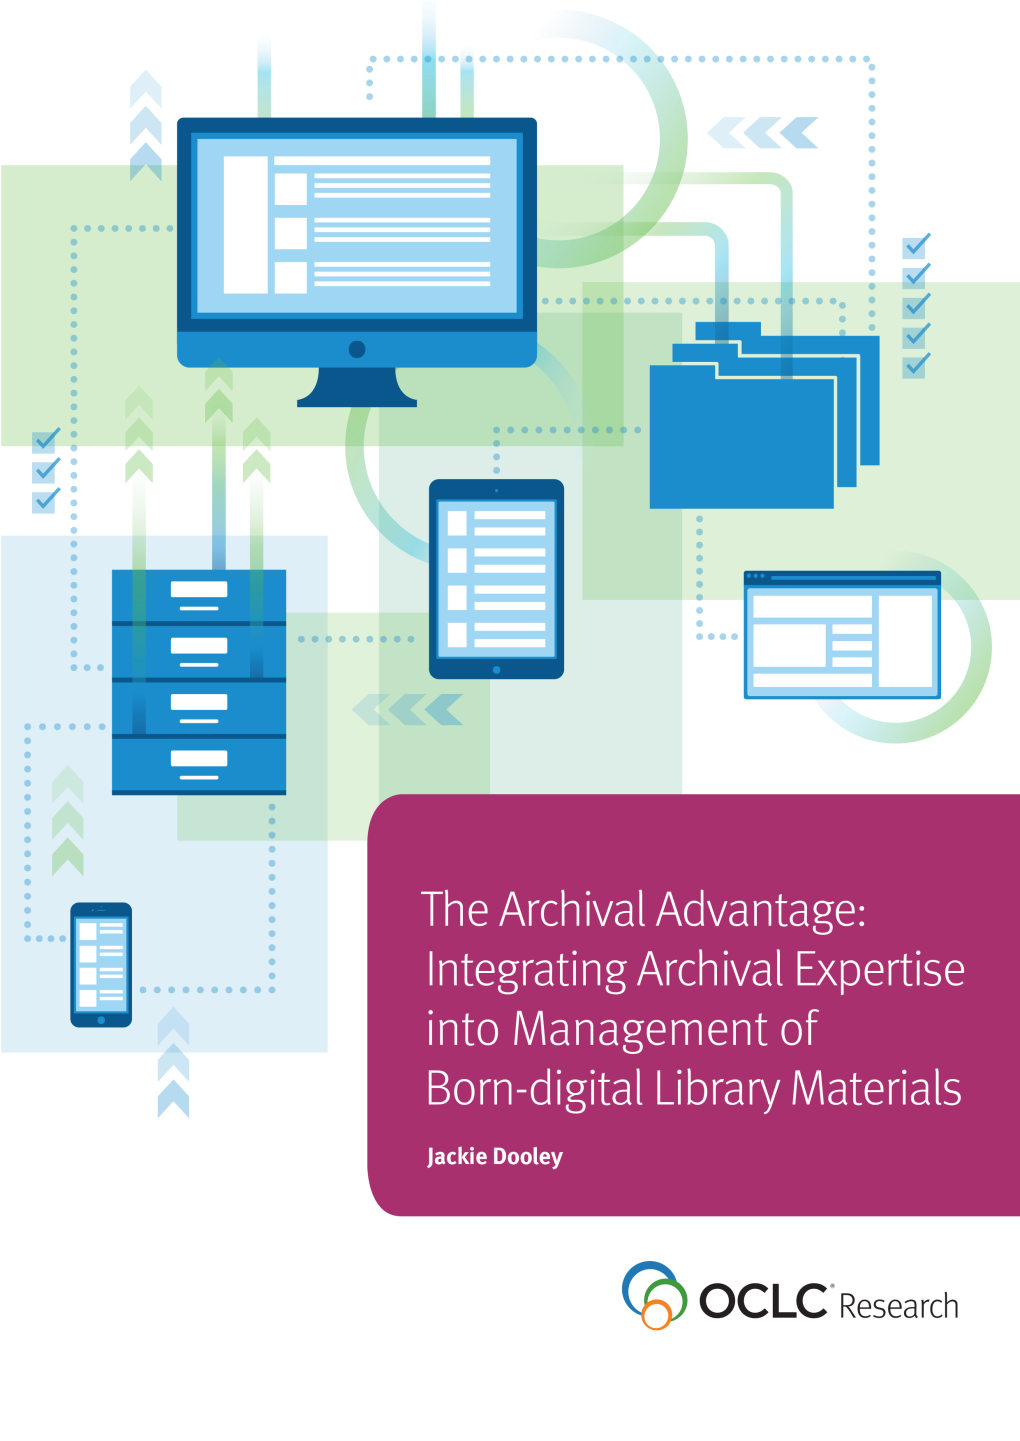 Integrating Archival Expertise Into Management of “Born-Digital” Library Materials